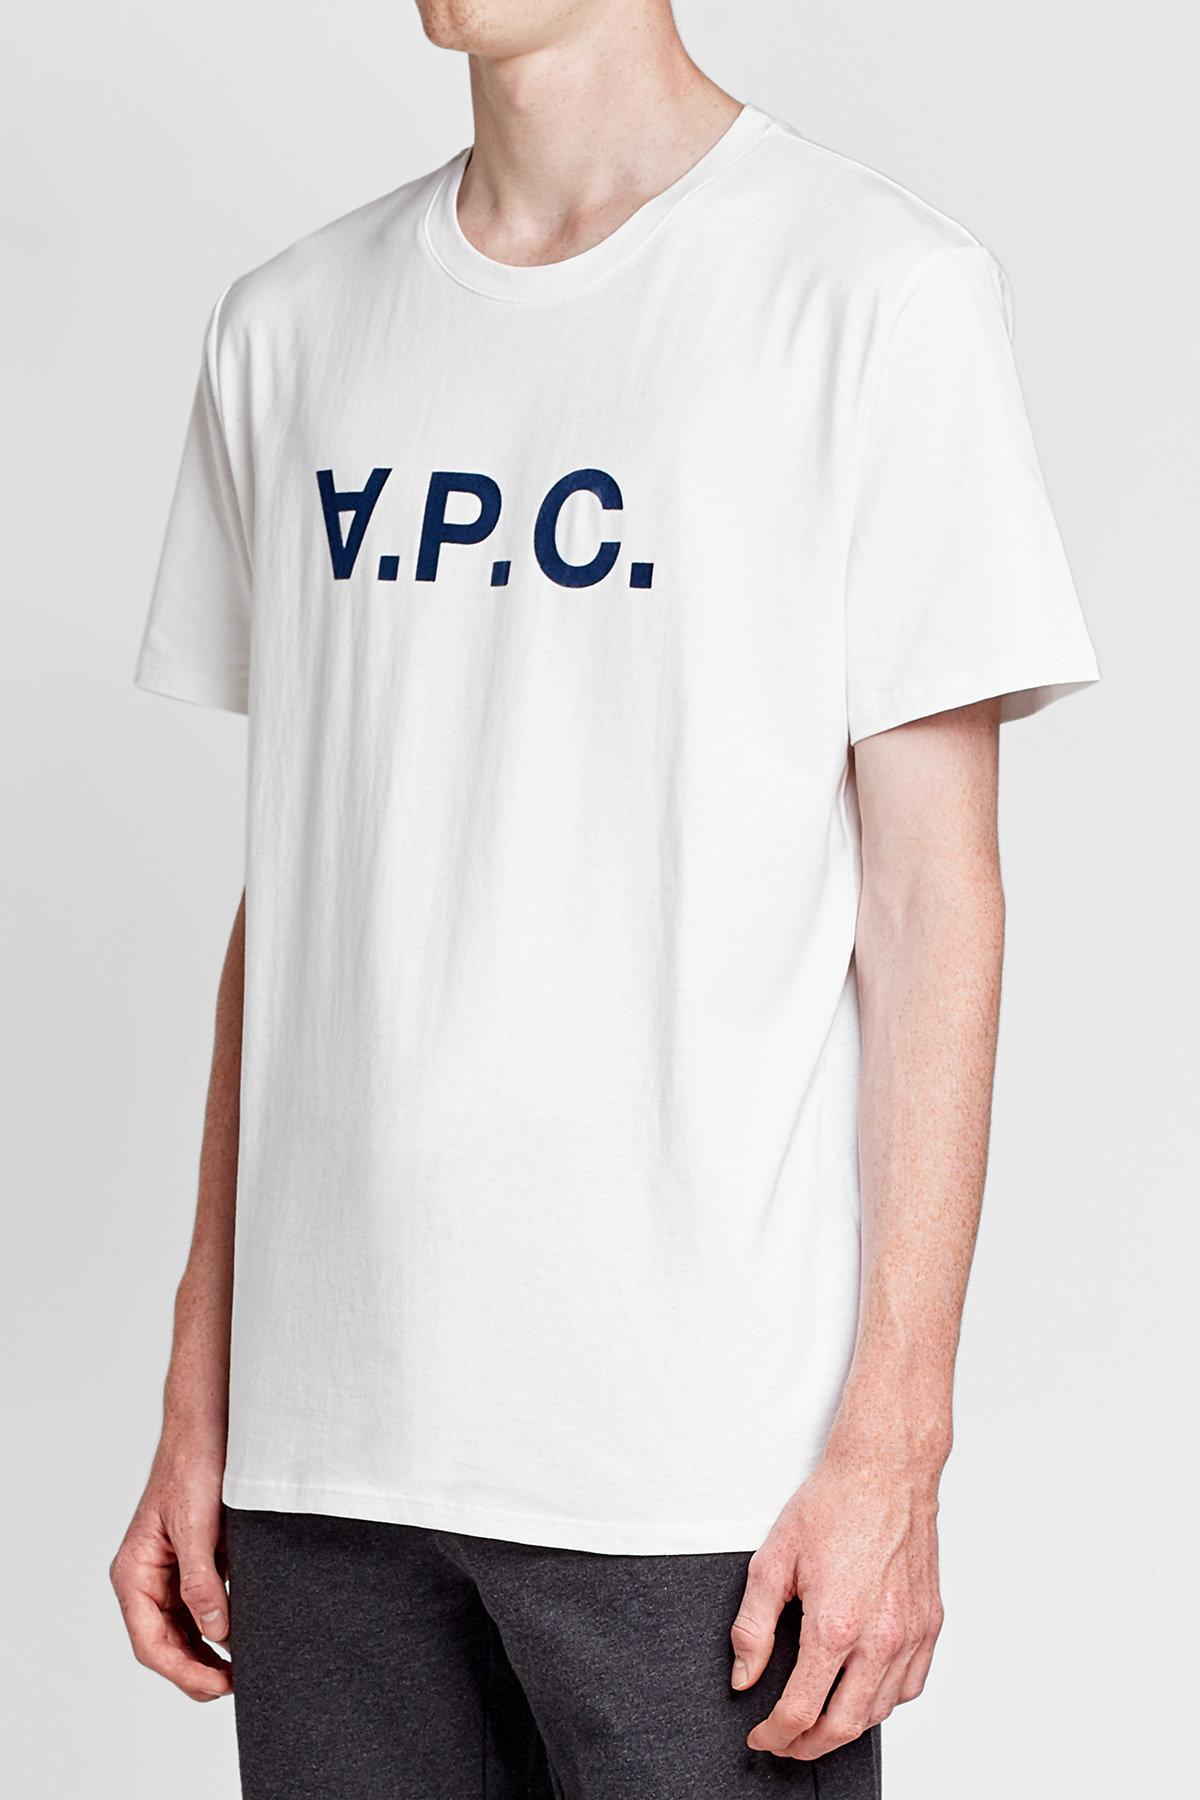 Lyst - A.p.c. Printed Cotton T-shirt for Men